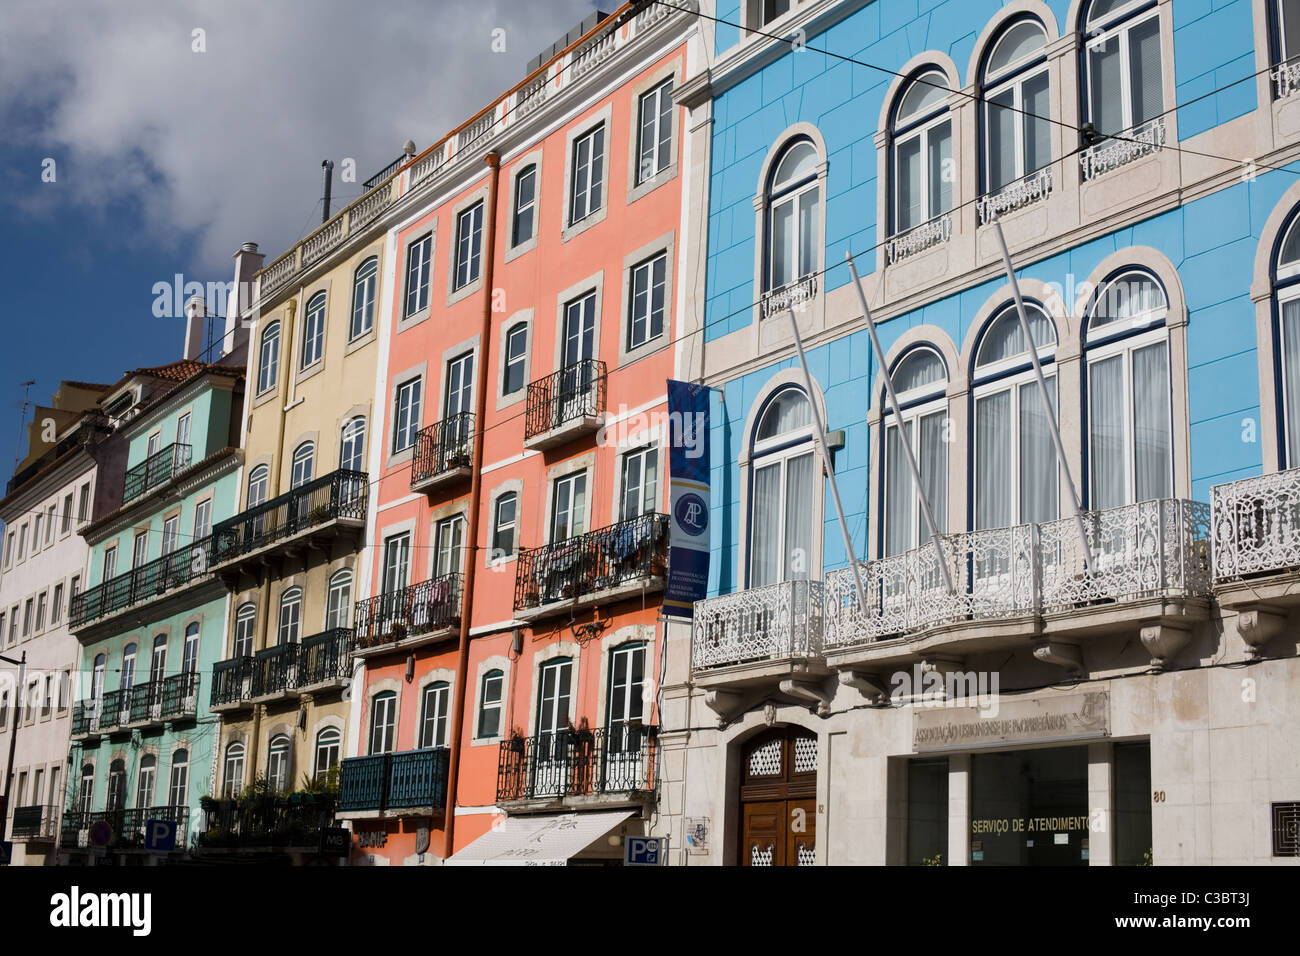 Colourful buildings in Principe Real neighborhood of Lisbon, Portugal Stock Photo